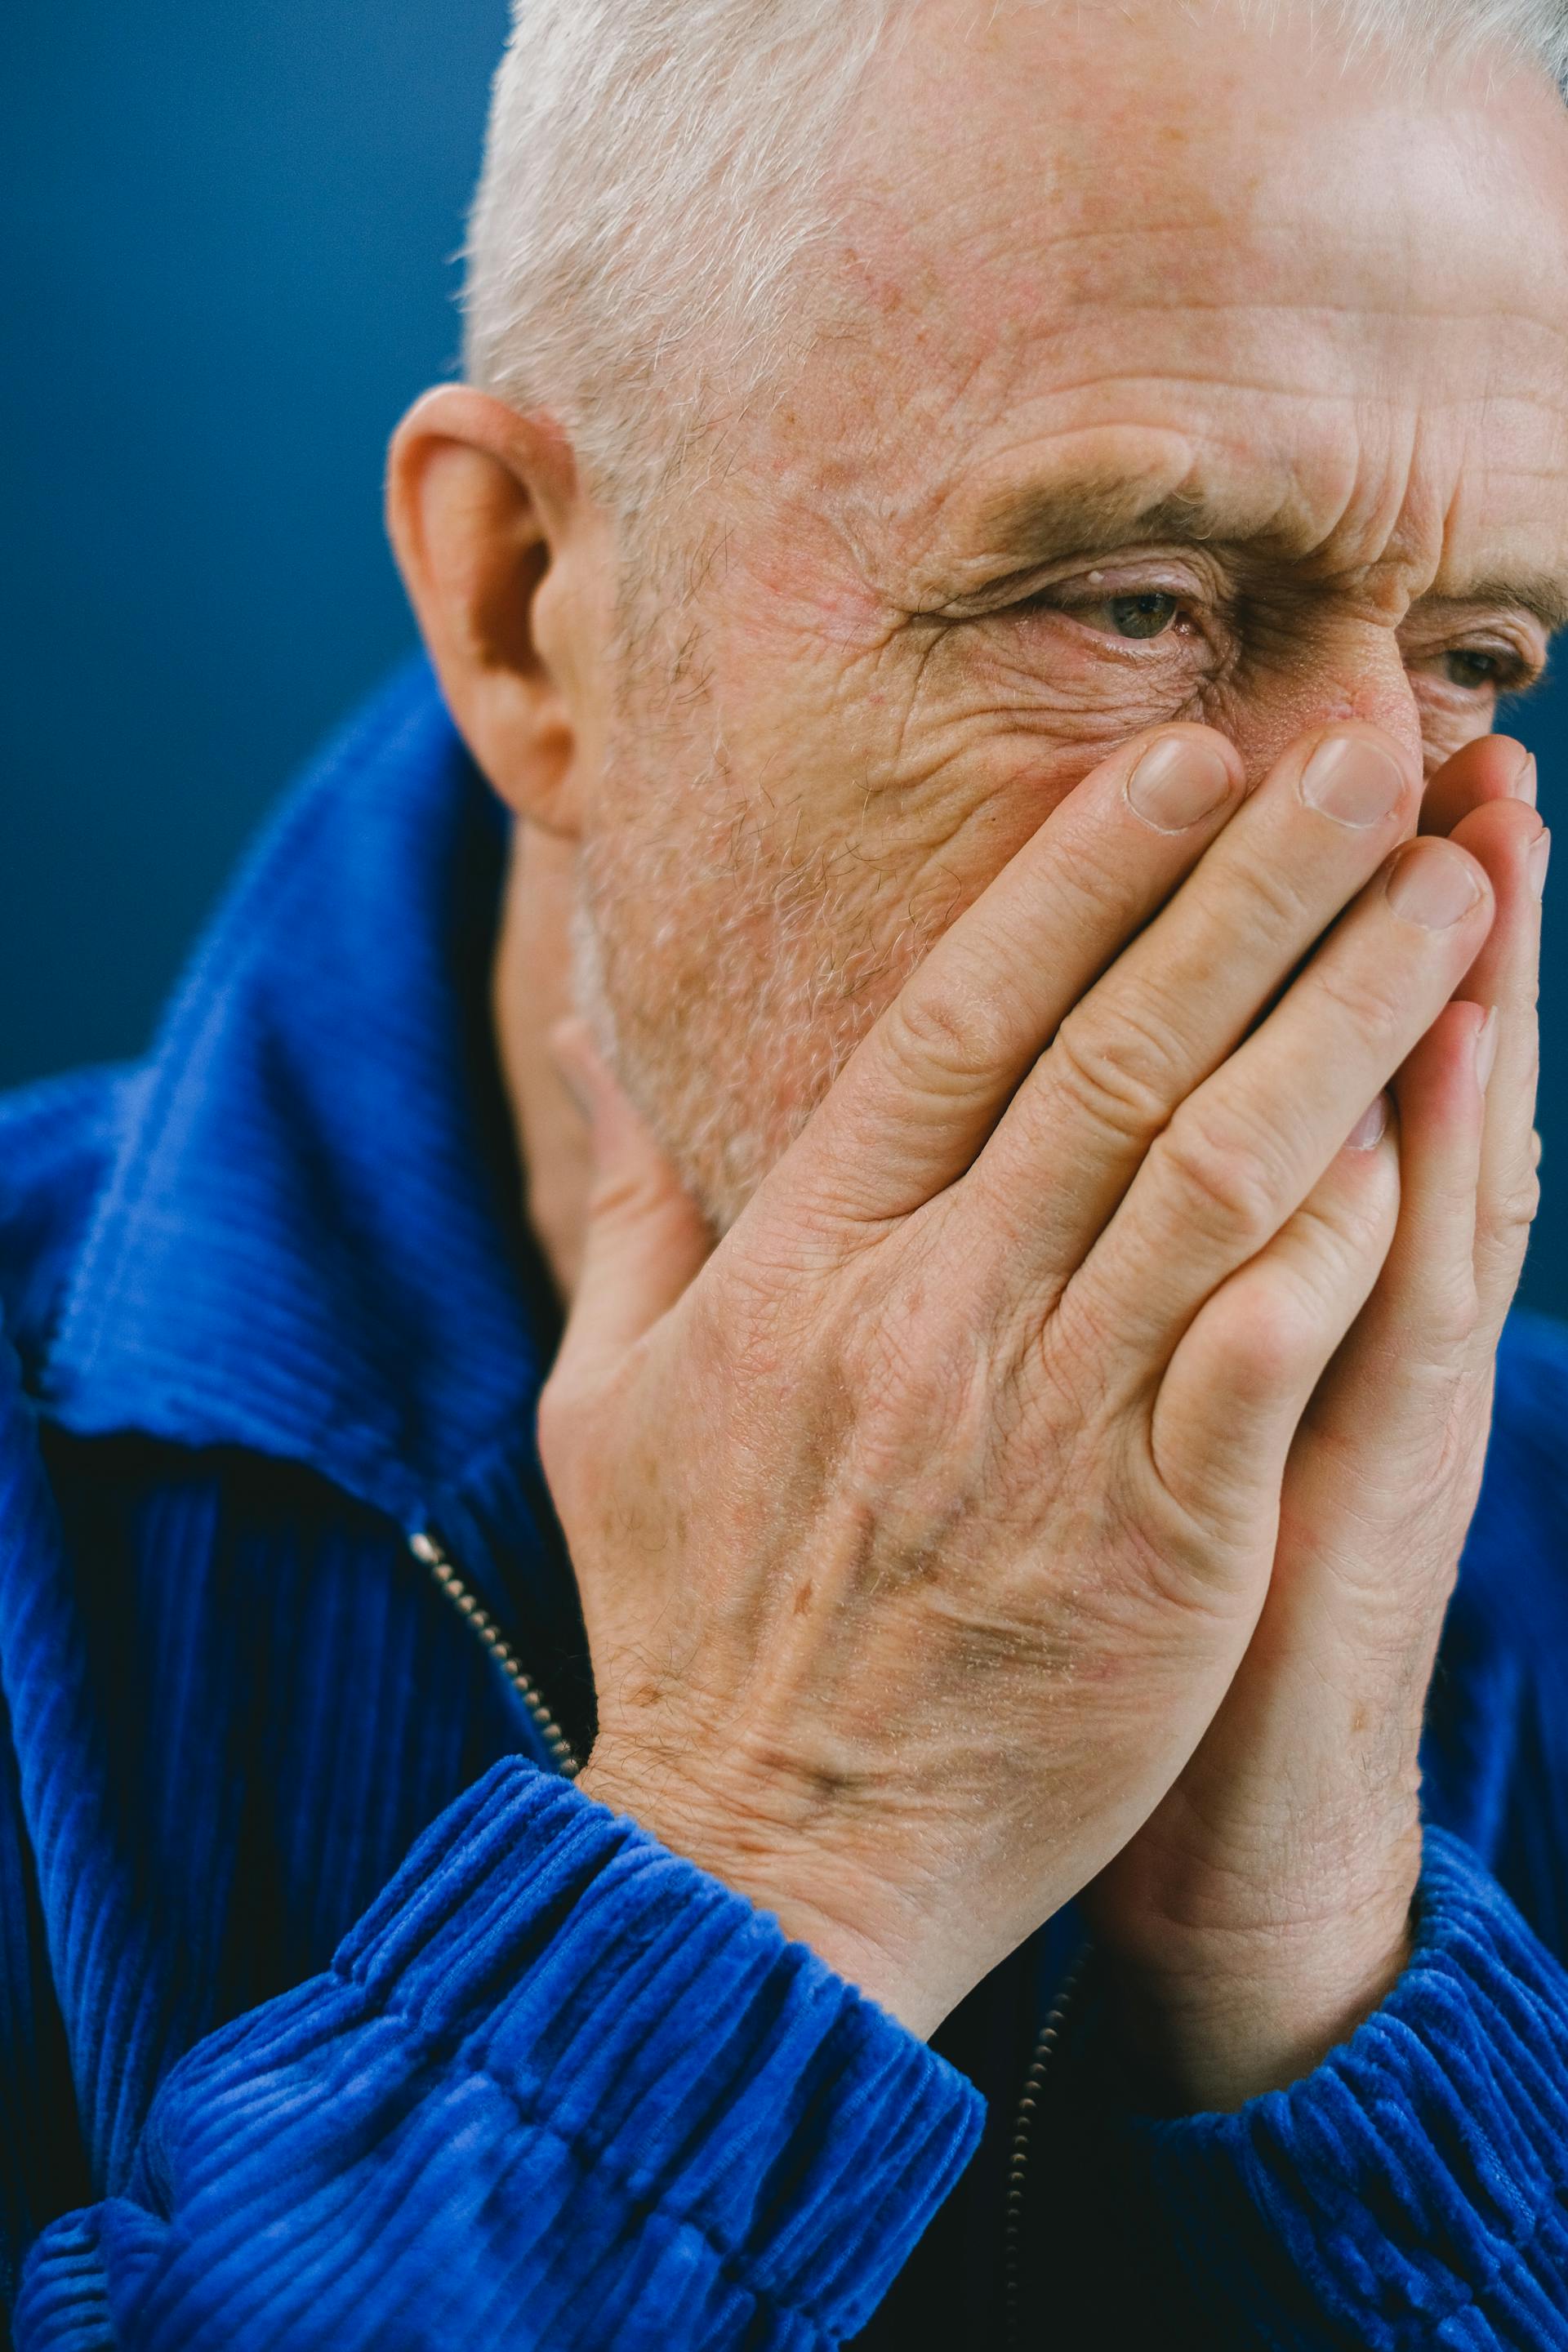 An old man covering his mouth | Source: Pexels